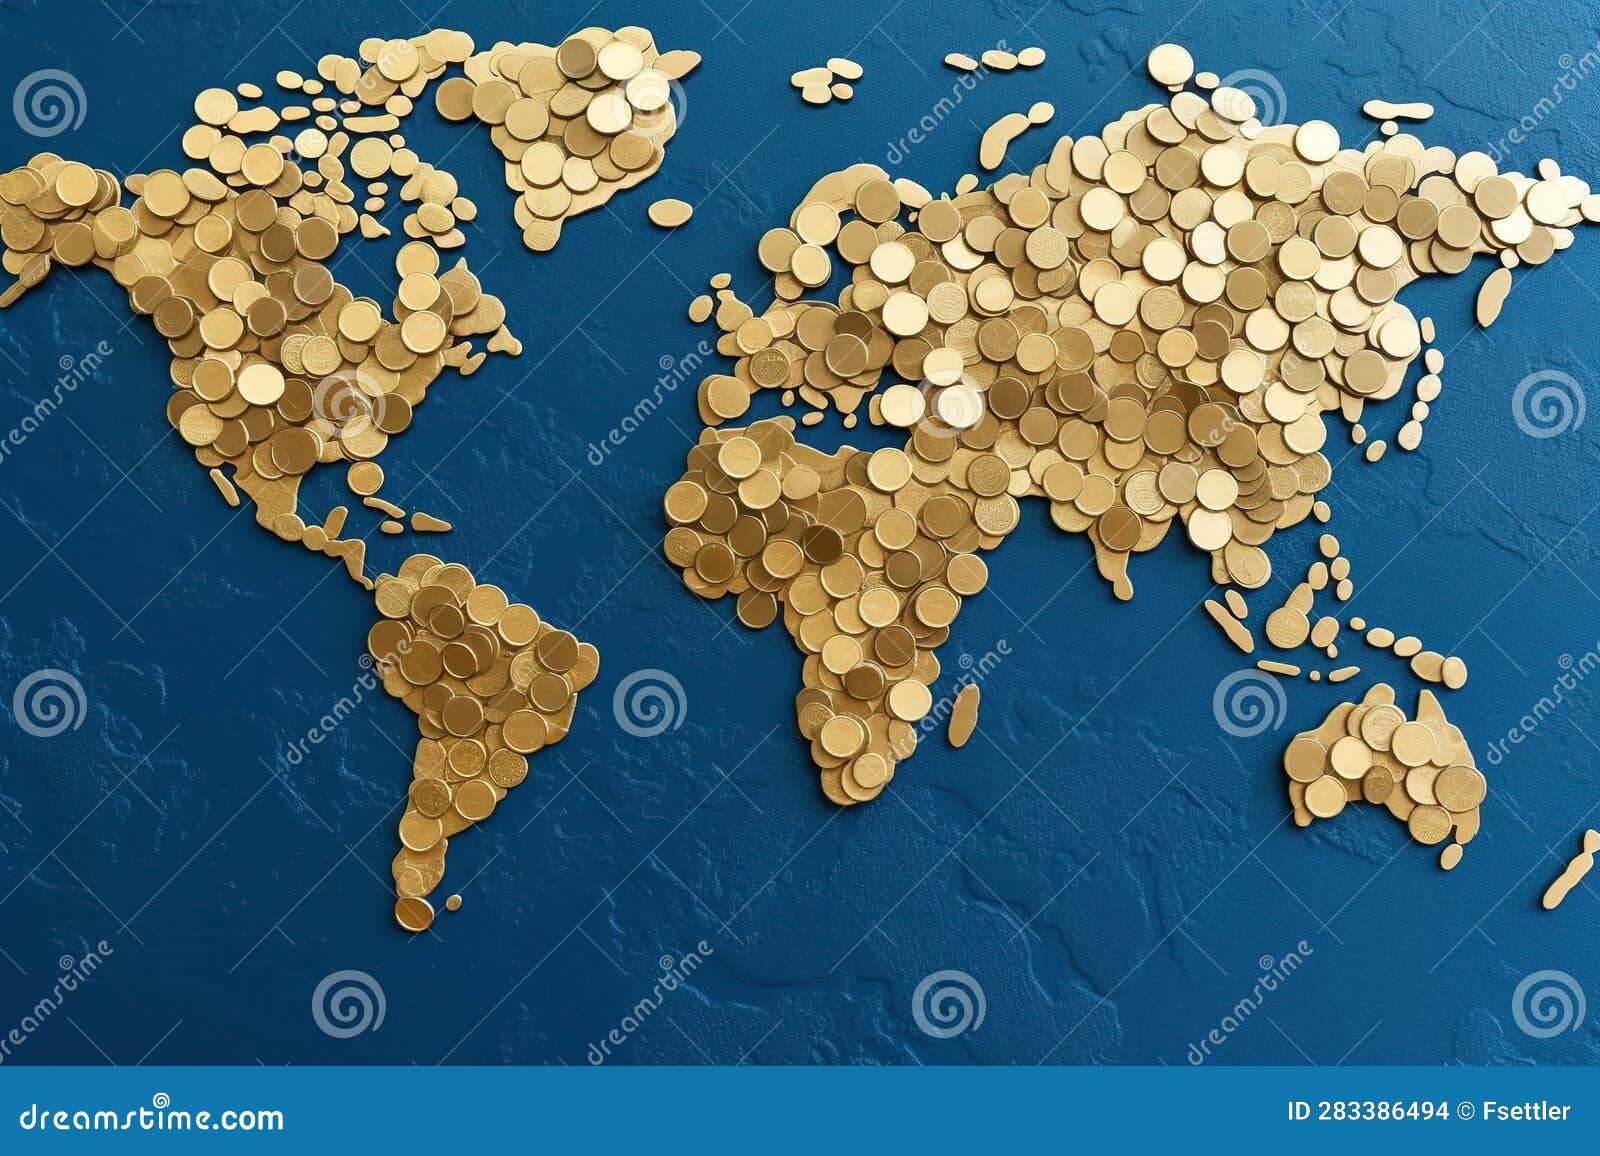 The World Map is Made Up of Many Gold Coins. Stock Illustration ...